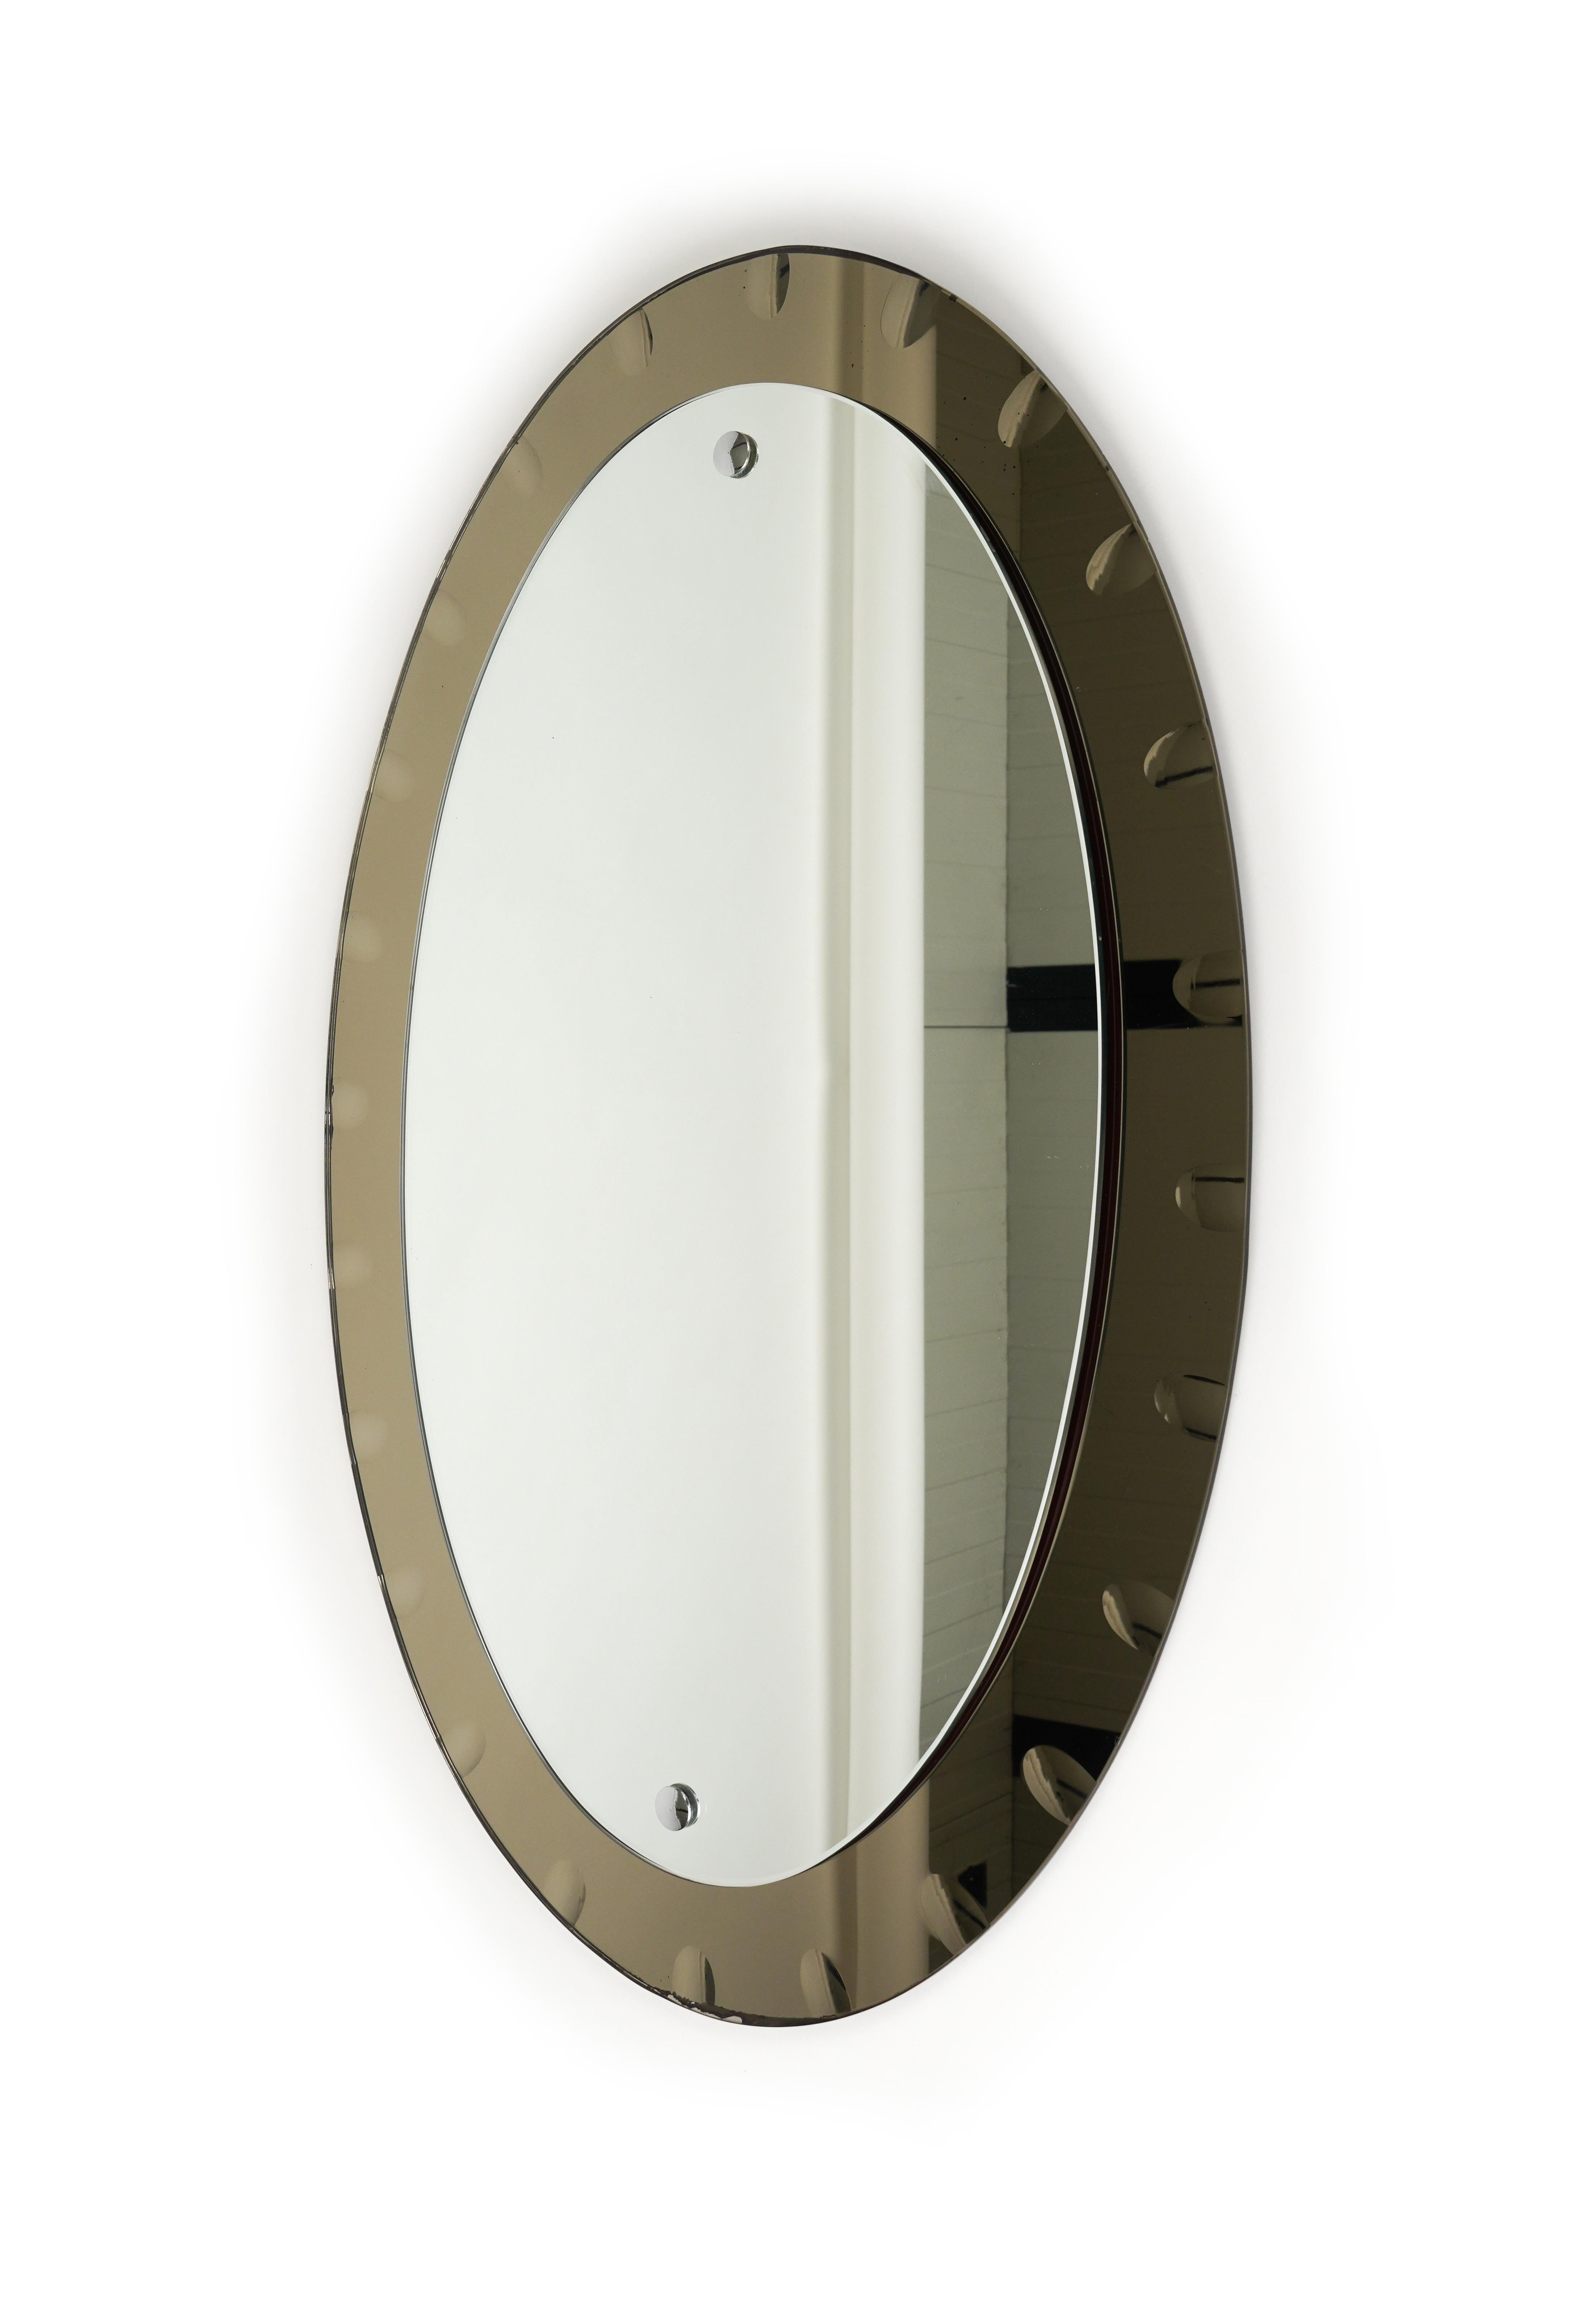 Midcentury Oval Wall Mirror with Bronzed Frame by Cristal Arte, Italy 1960s For Sale 2